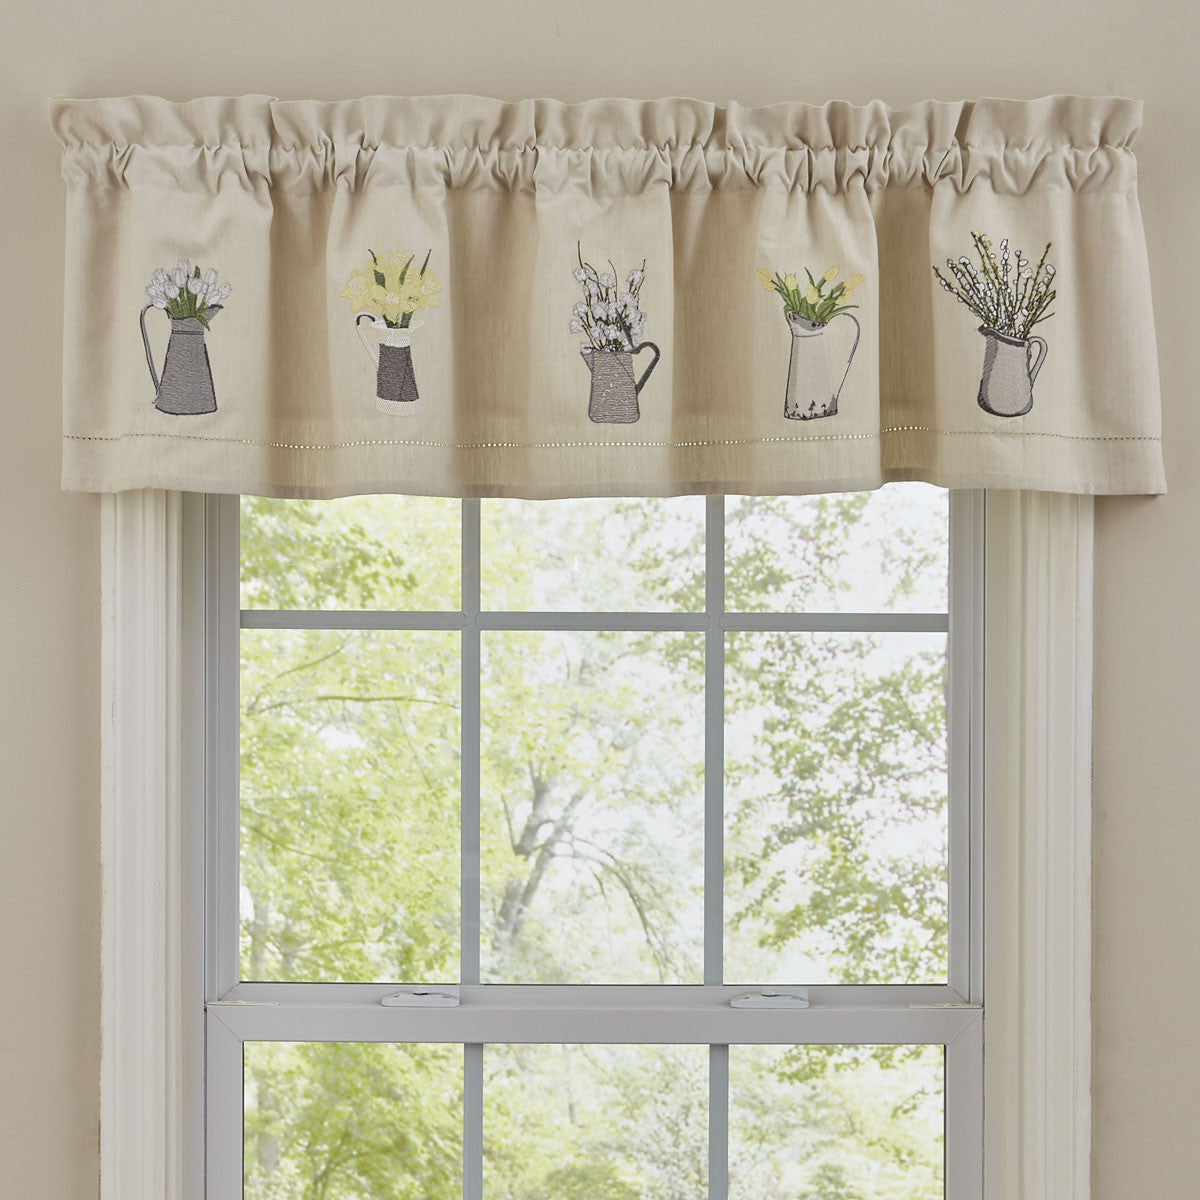 Pitcher with Flowers Embroidered Lined Valance 60'' x 14'' Park Designs